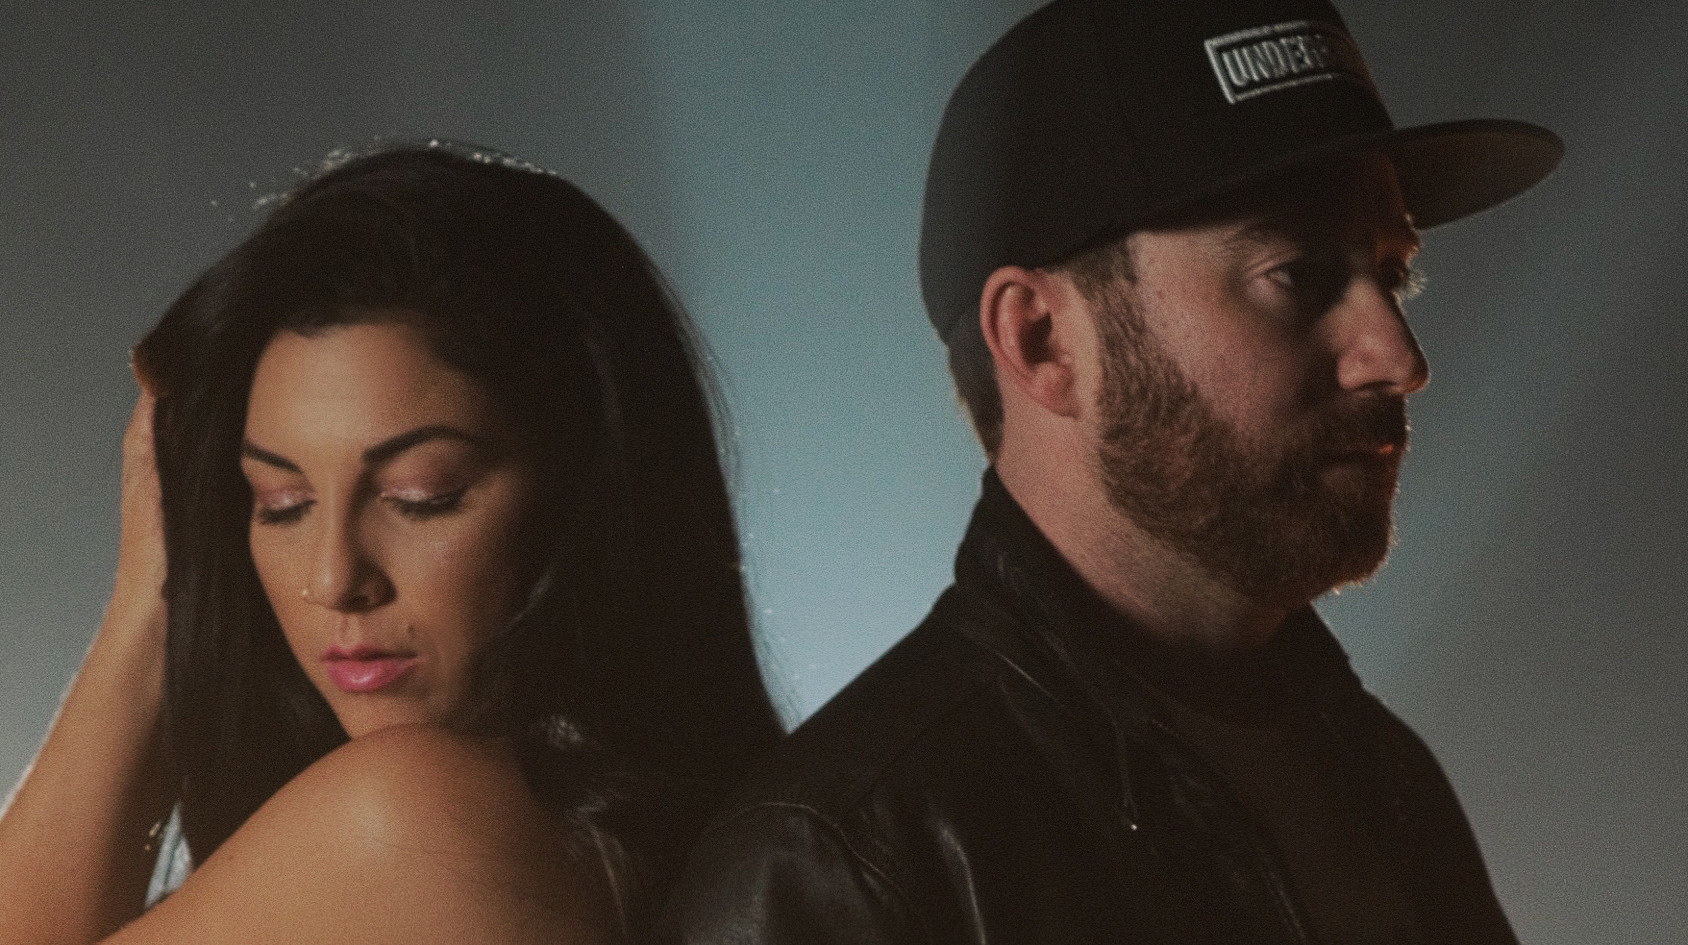 Ryan Riback releases ‘Wrong’ featuring Olivia Noelle